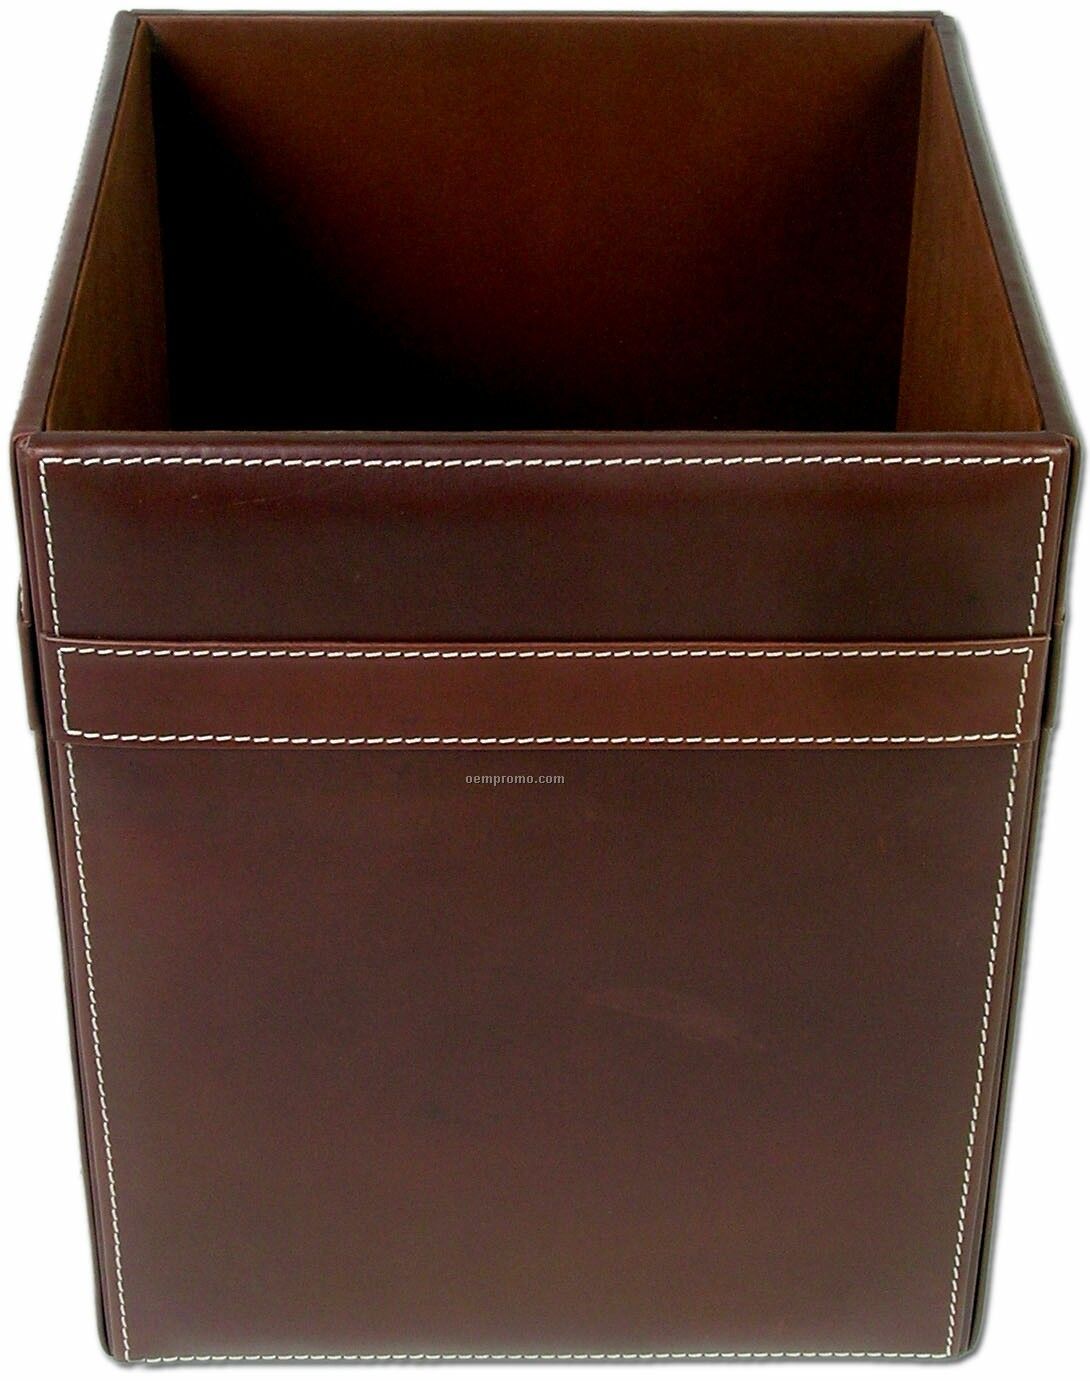 Rustic Brown Leather Square Waste Basket